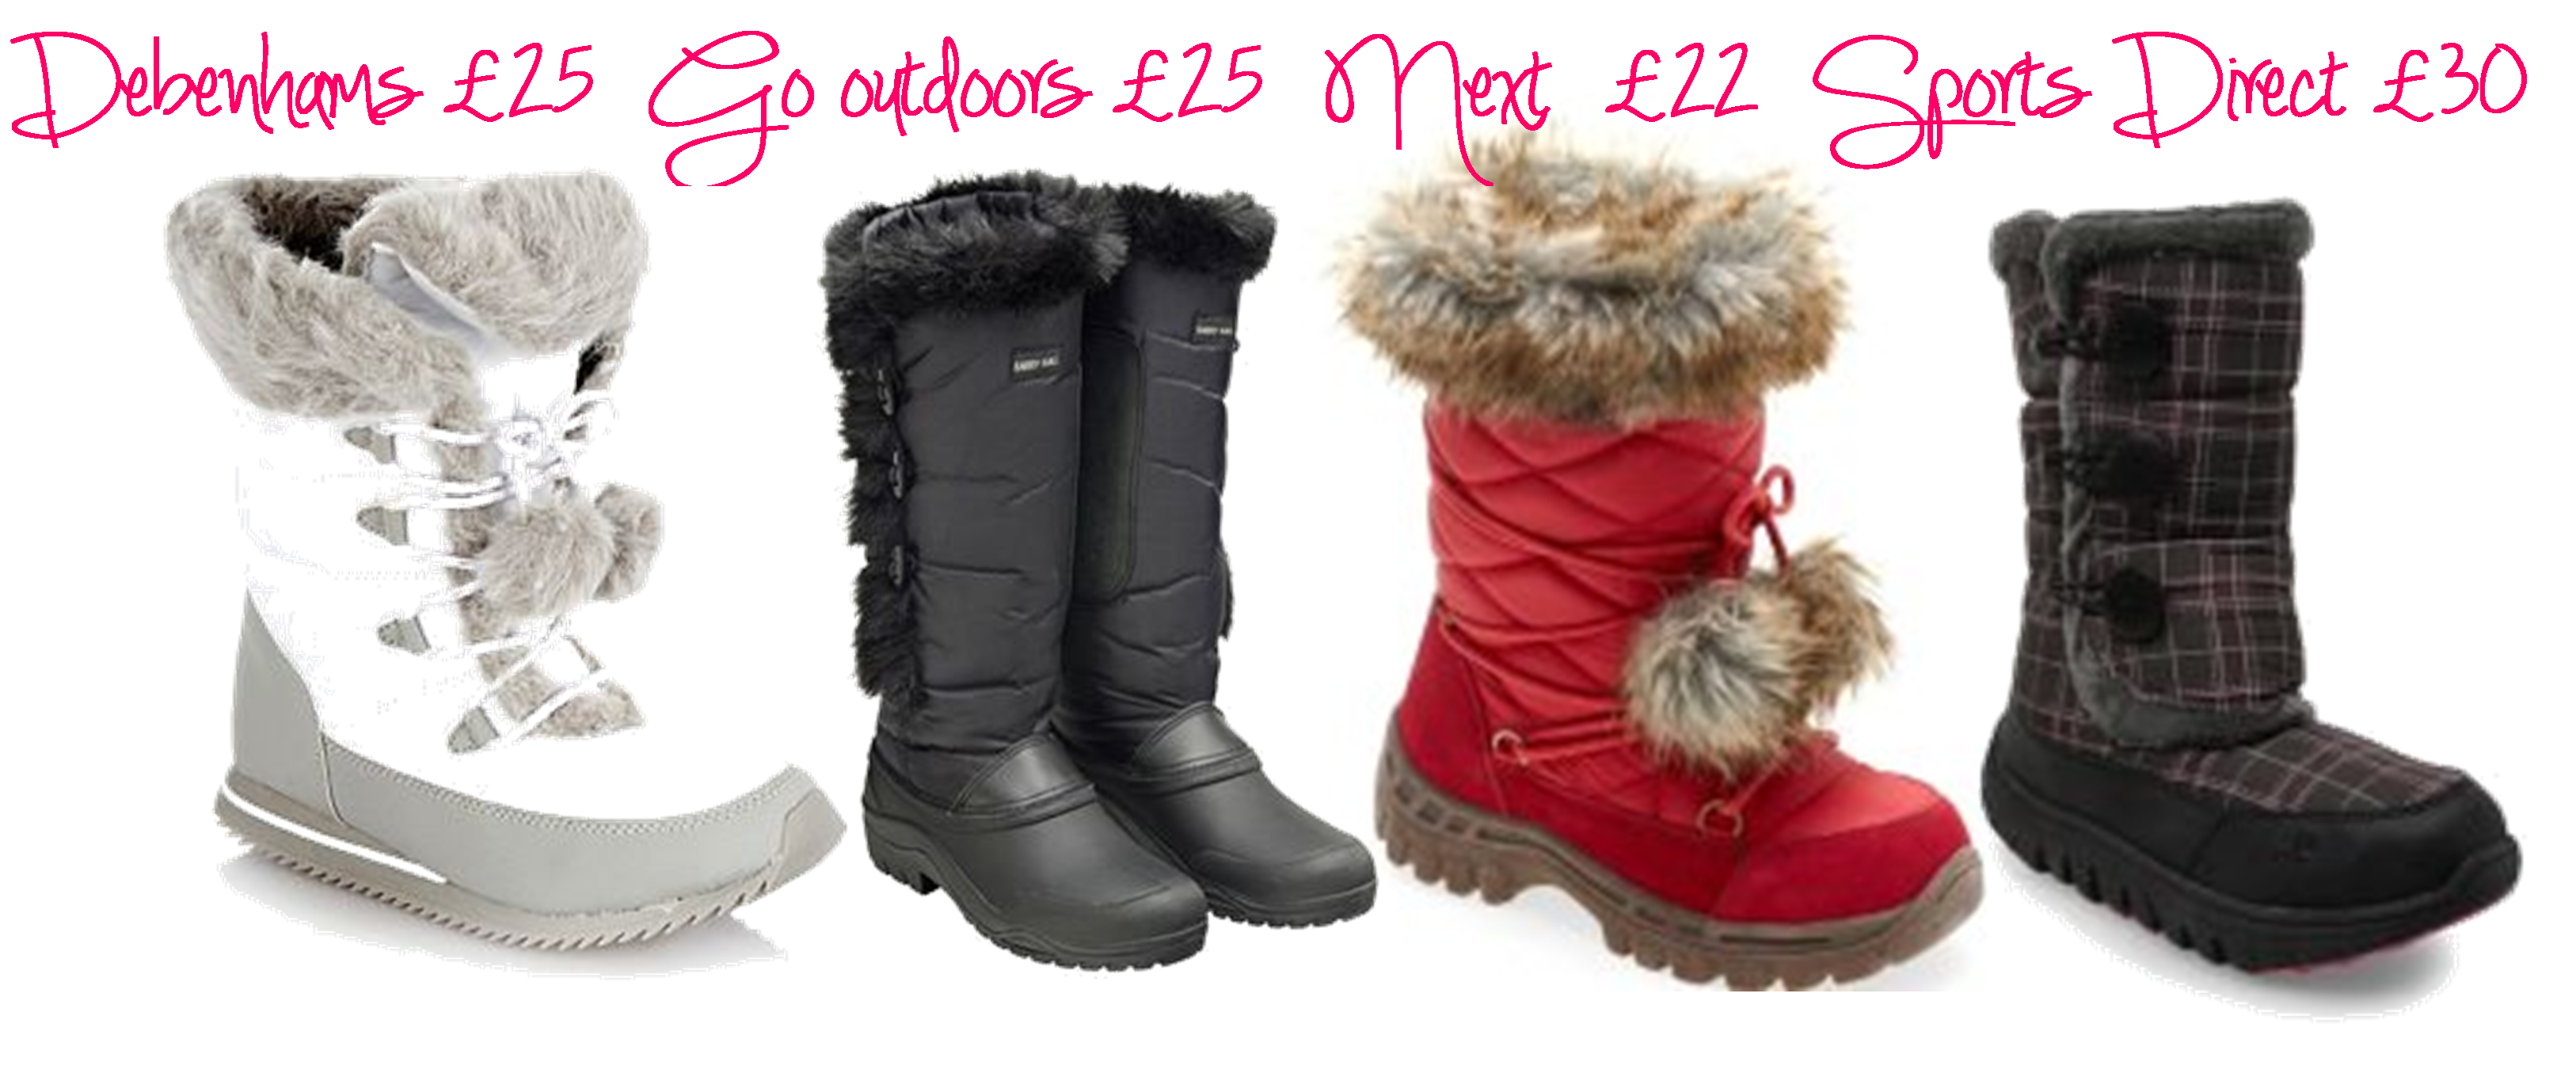 sports direct snow boots